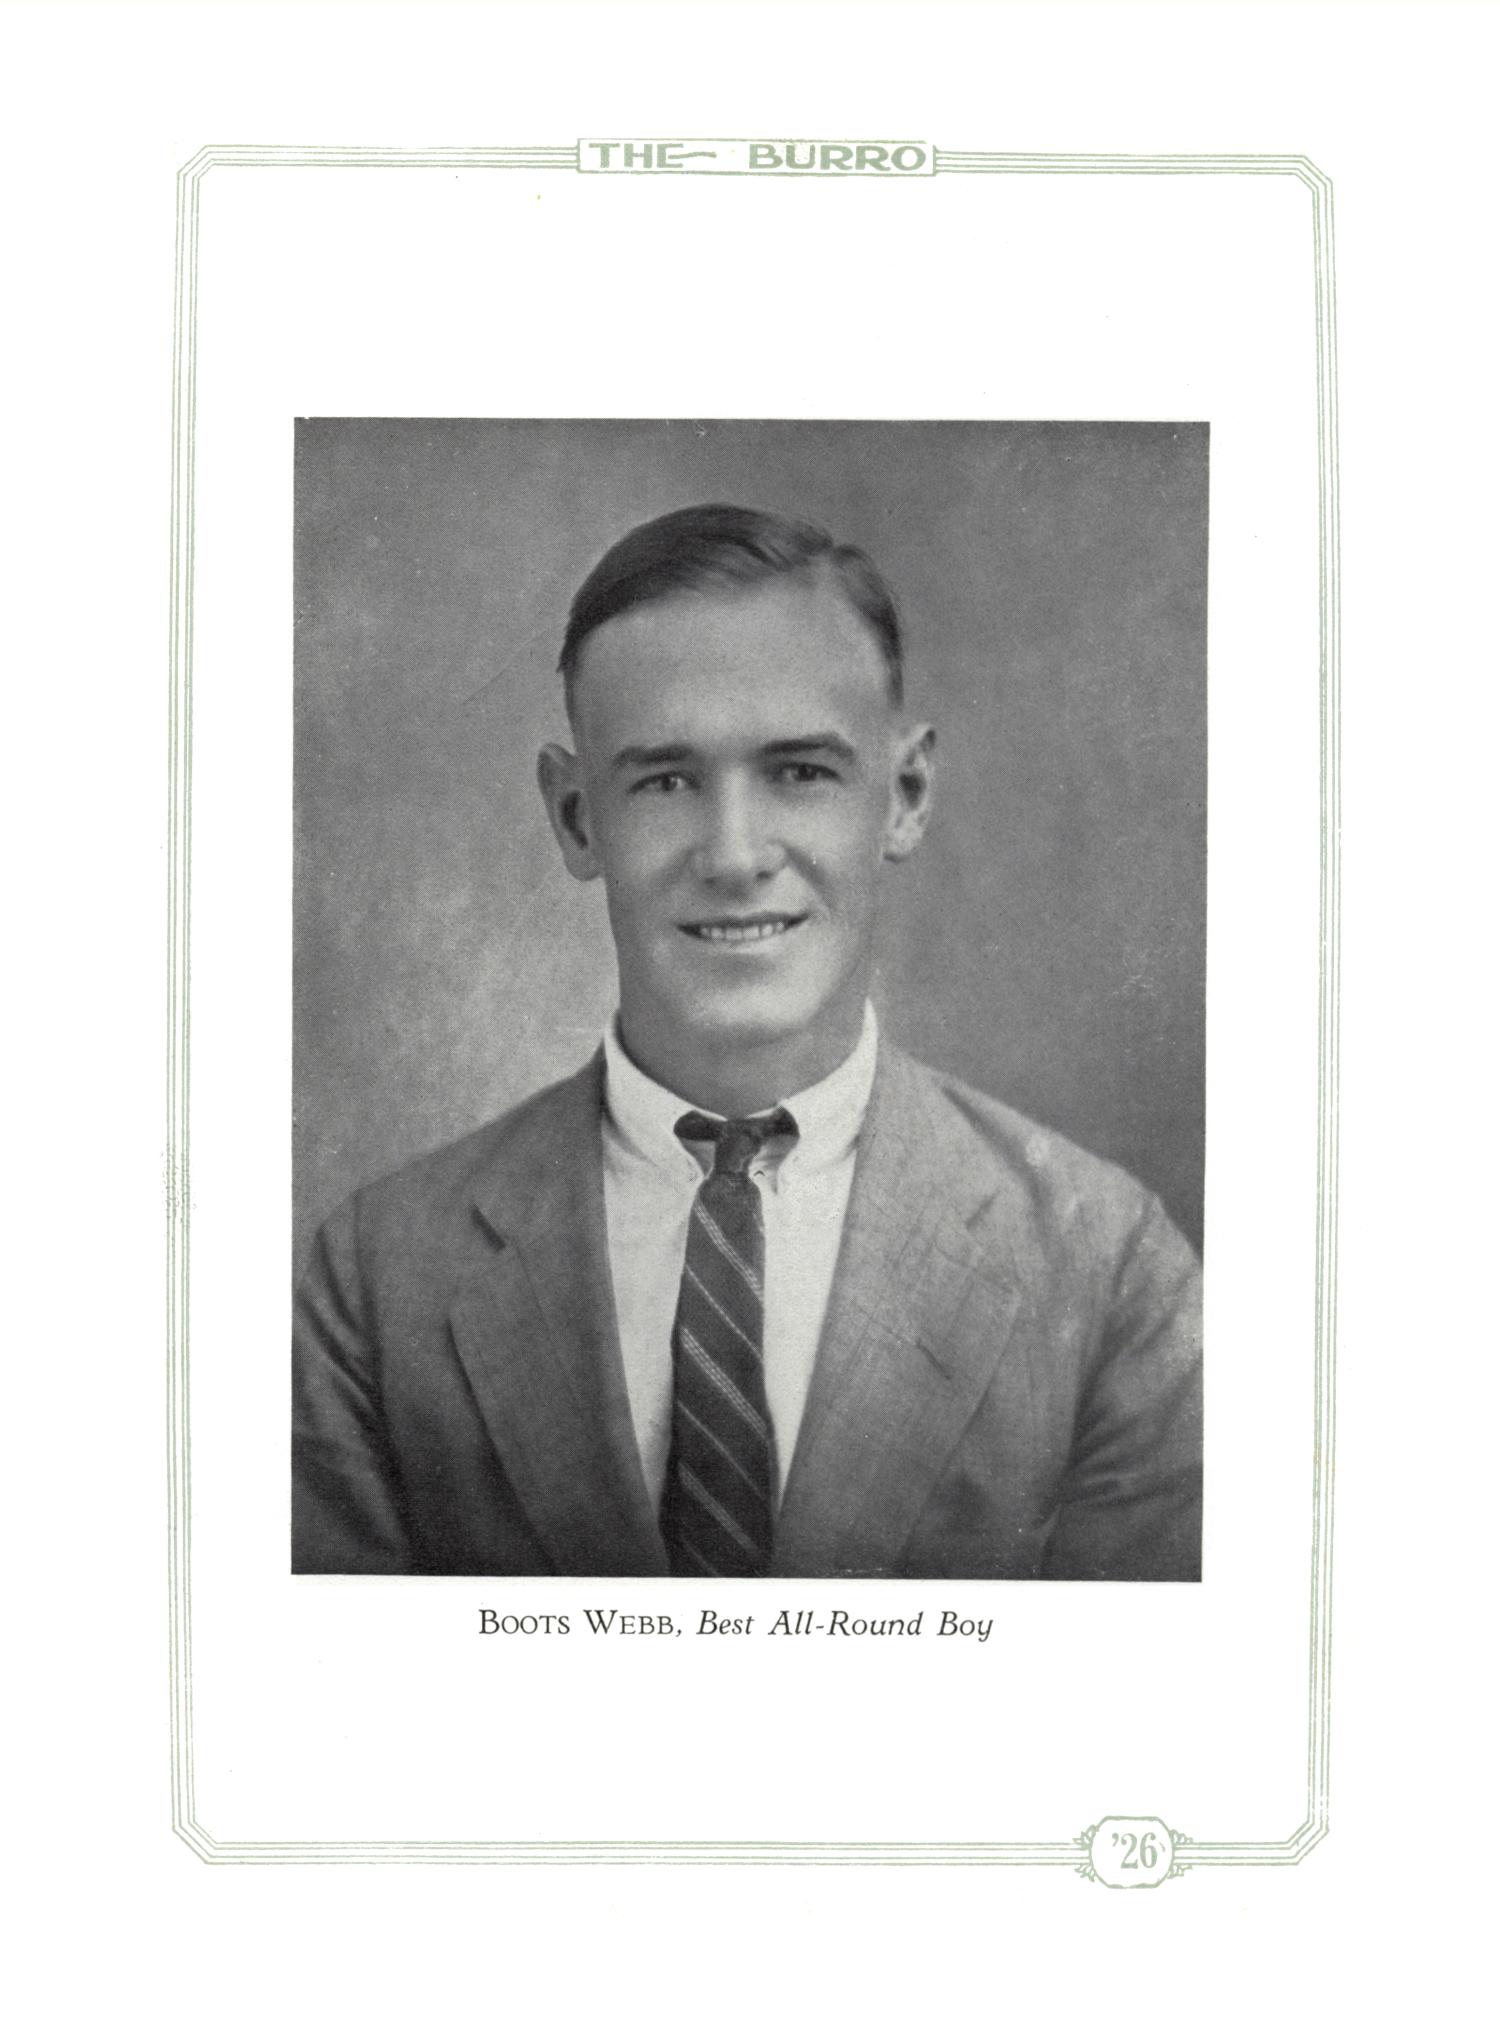 The Burro, Yearbook of Mineral Wells High School, 1926
                                                
                                                    74
                                                